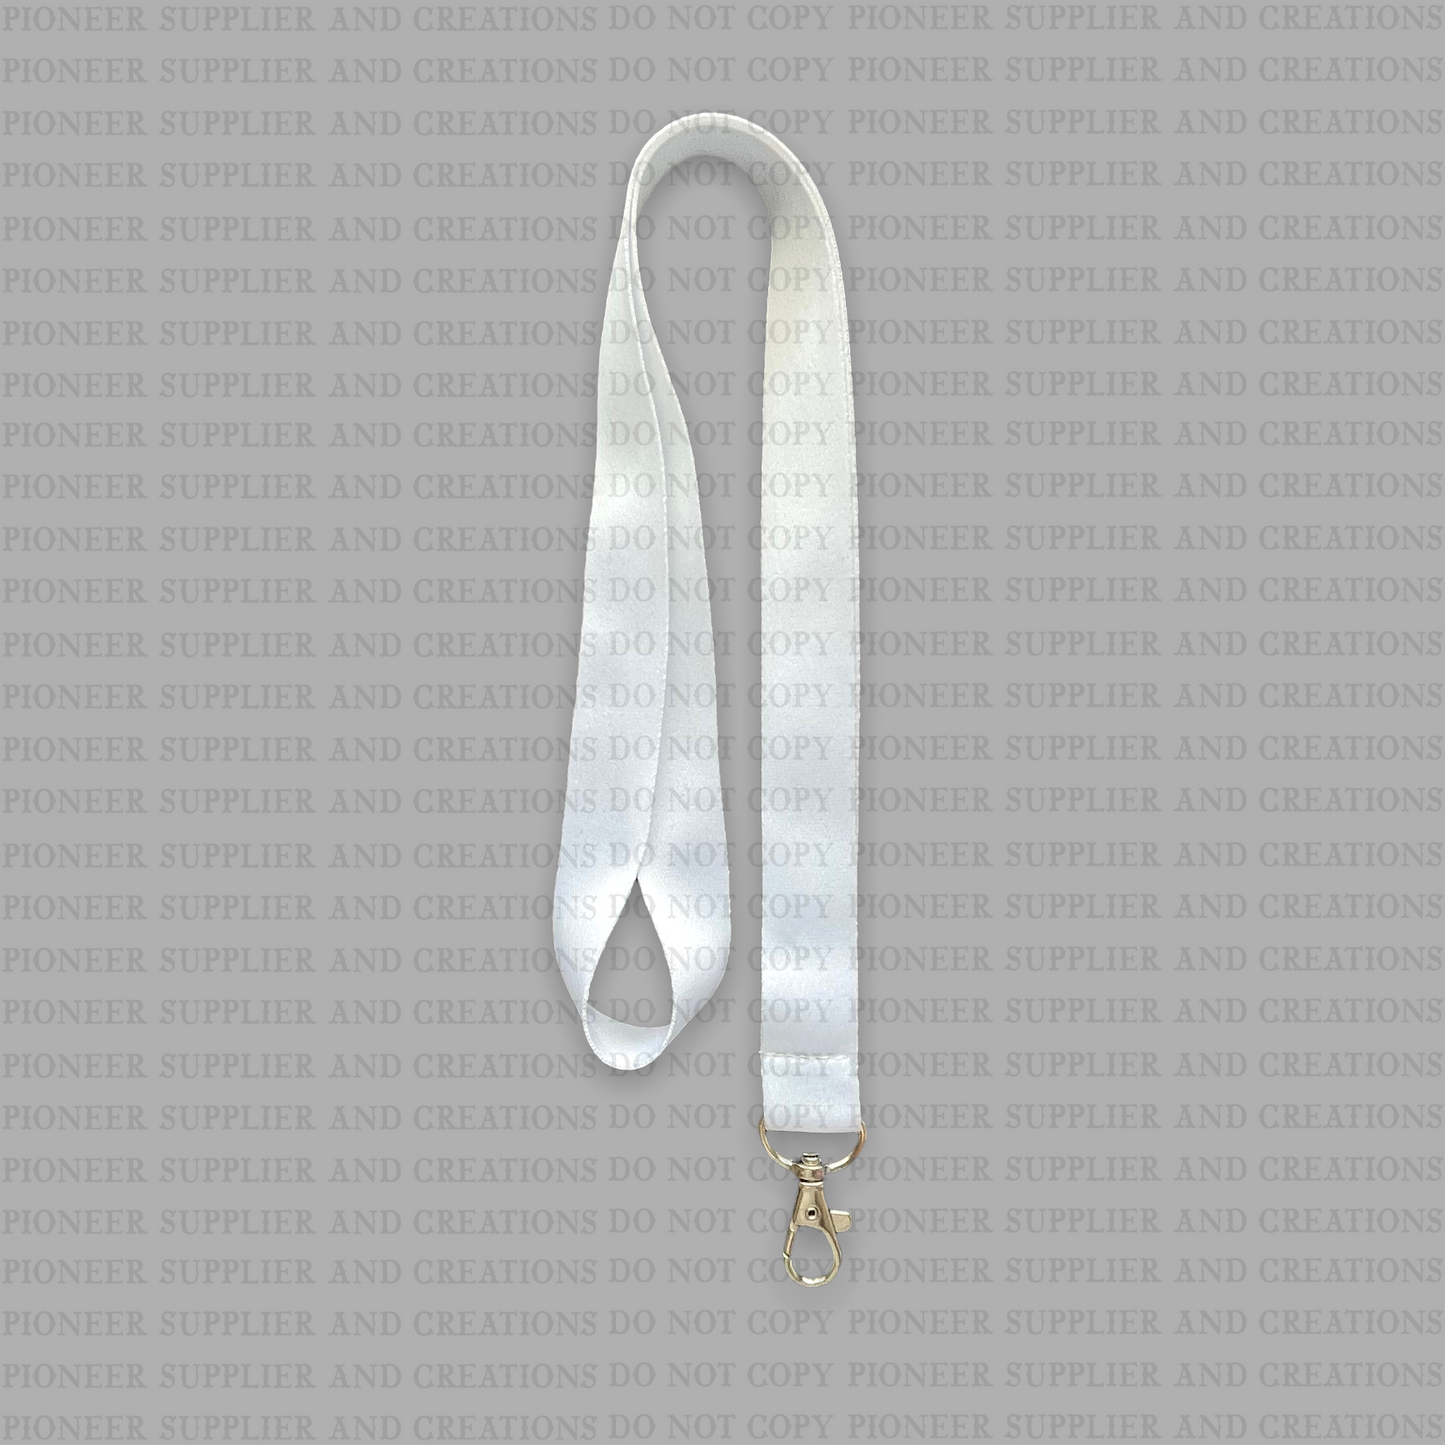 Lanyard Sublimation Blank - Pioneer Supplier & Creations